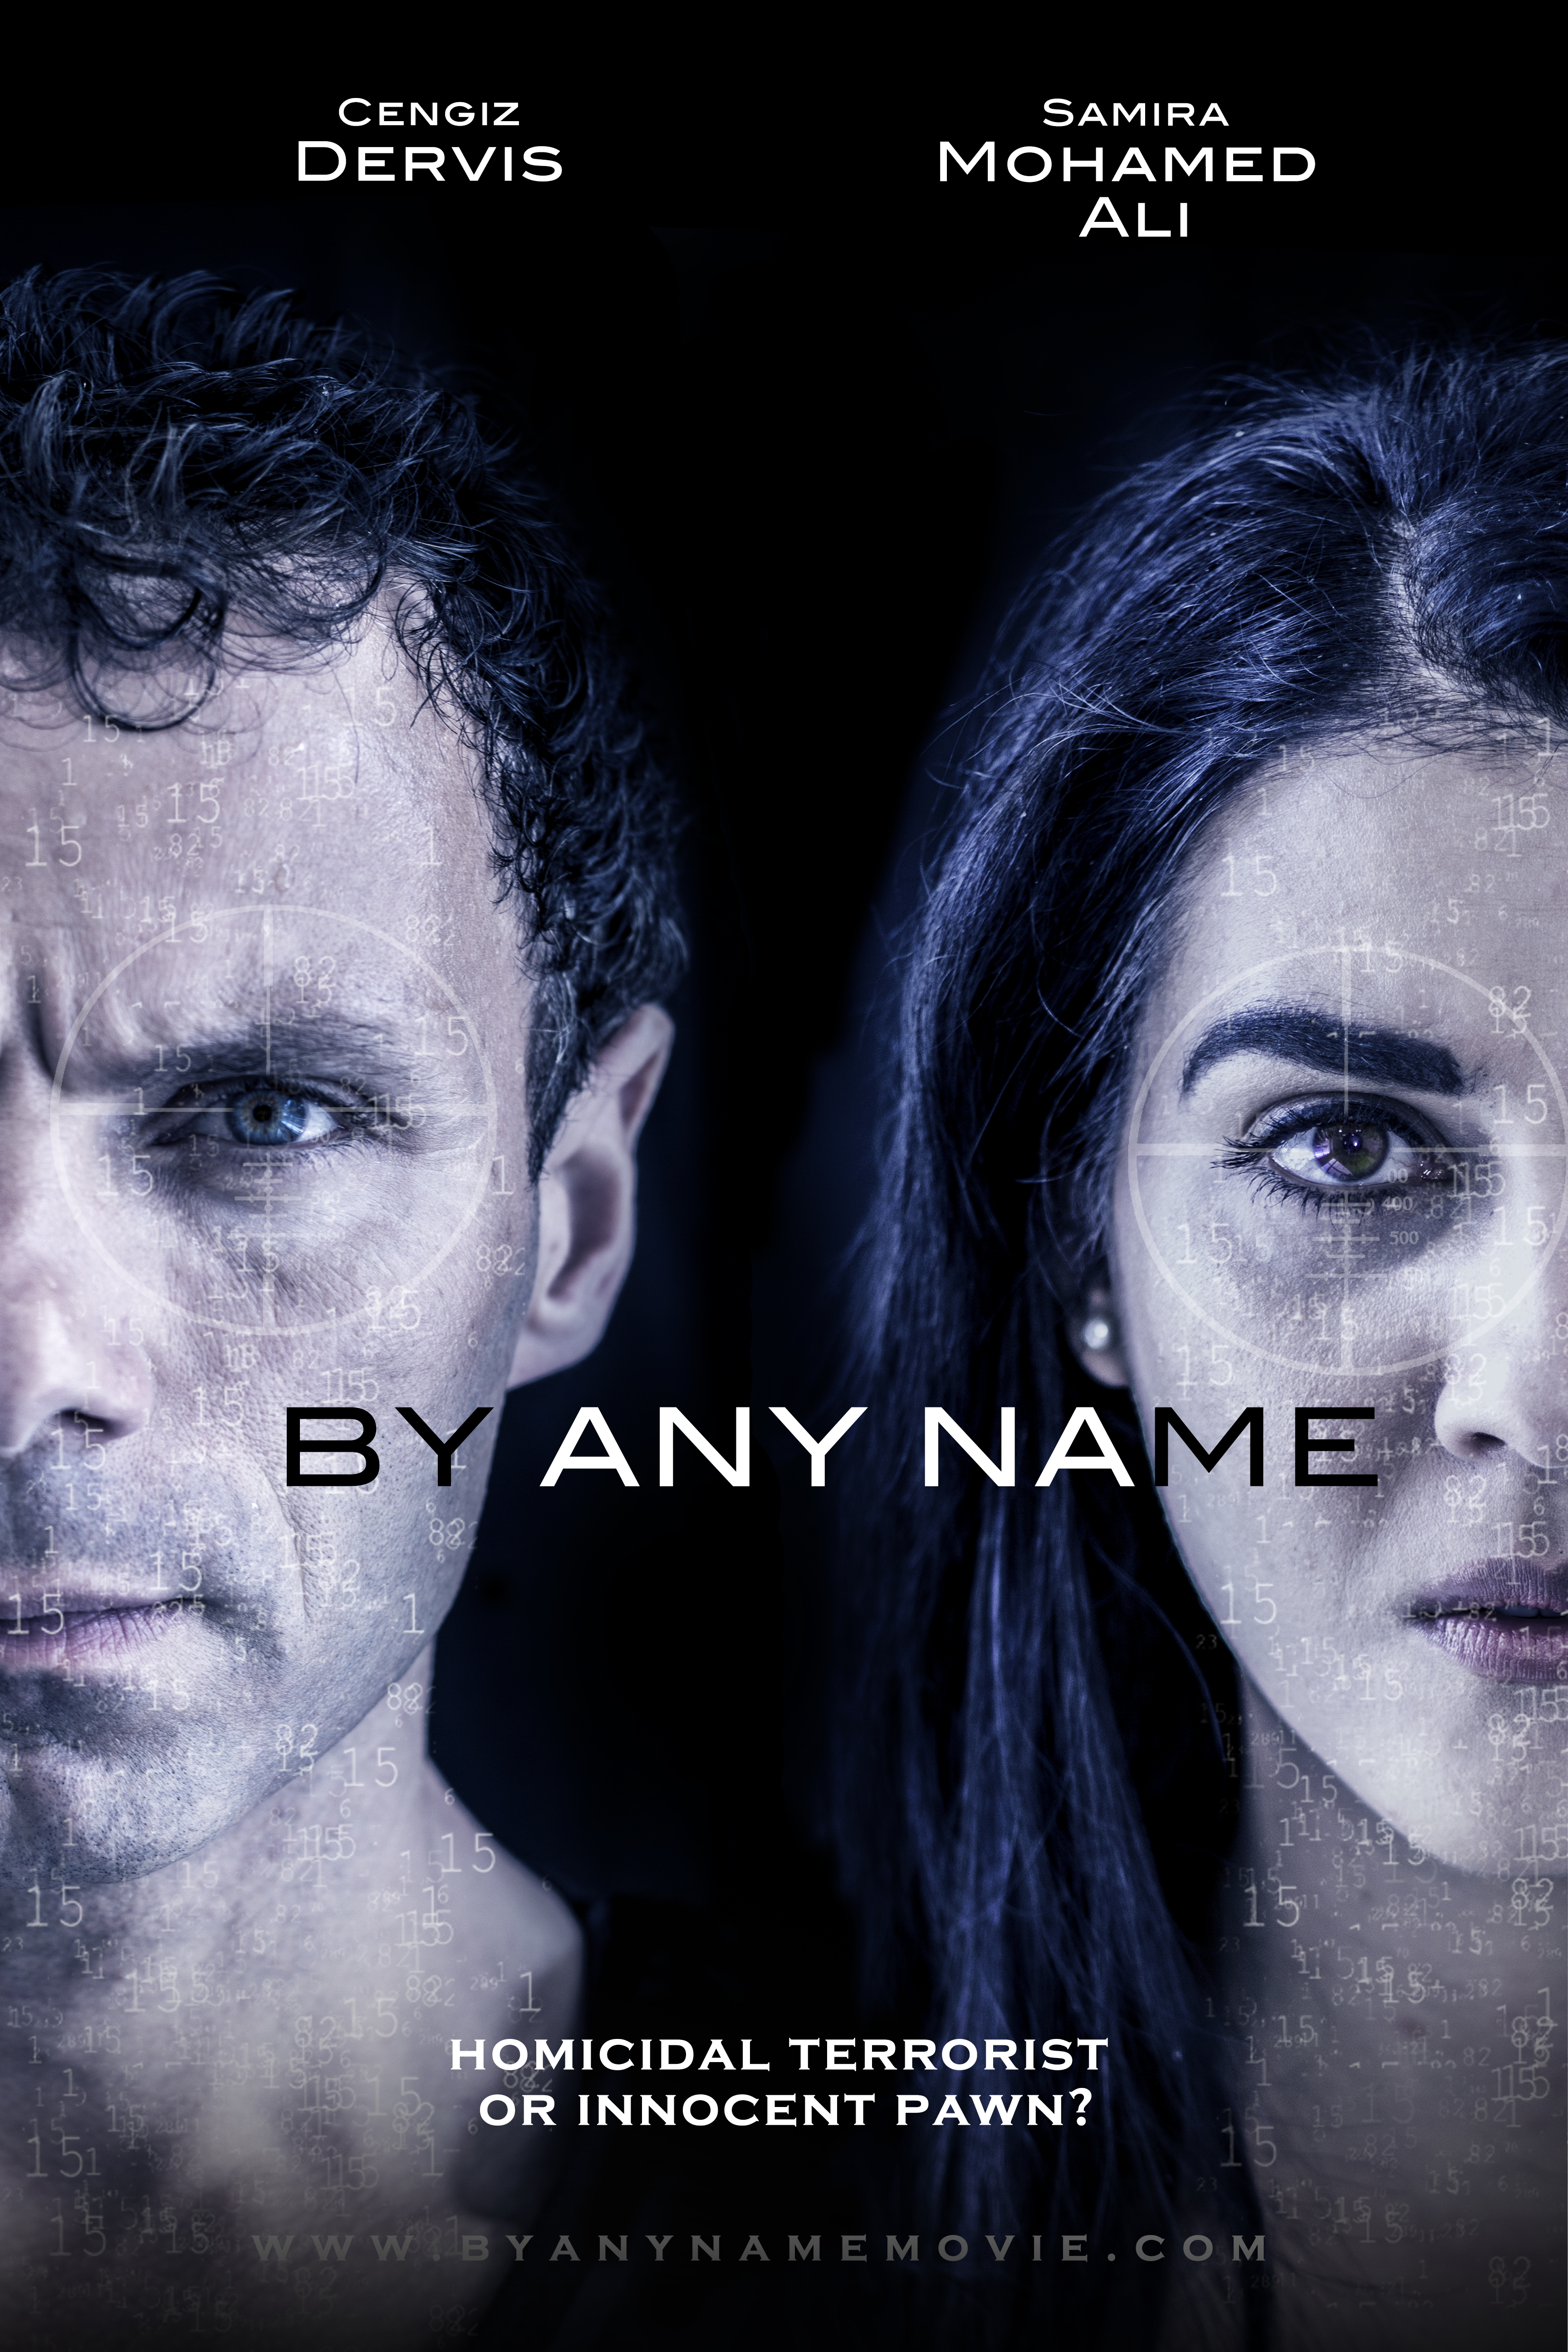 Cengiz as John West in By Any Name. Screenplay adapted from the best selling book of the same name by Katherine John.